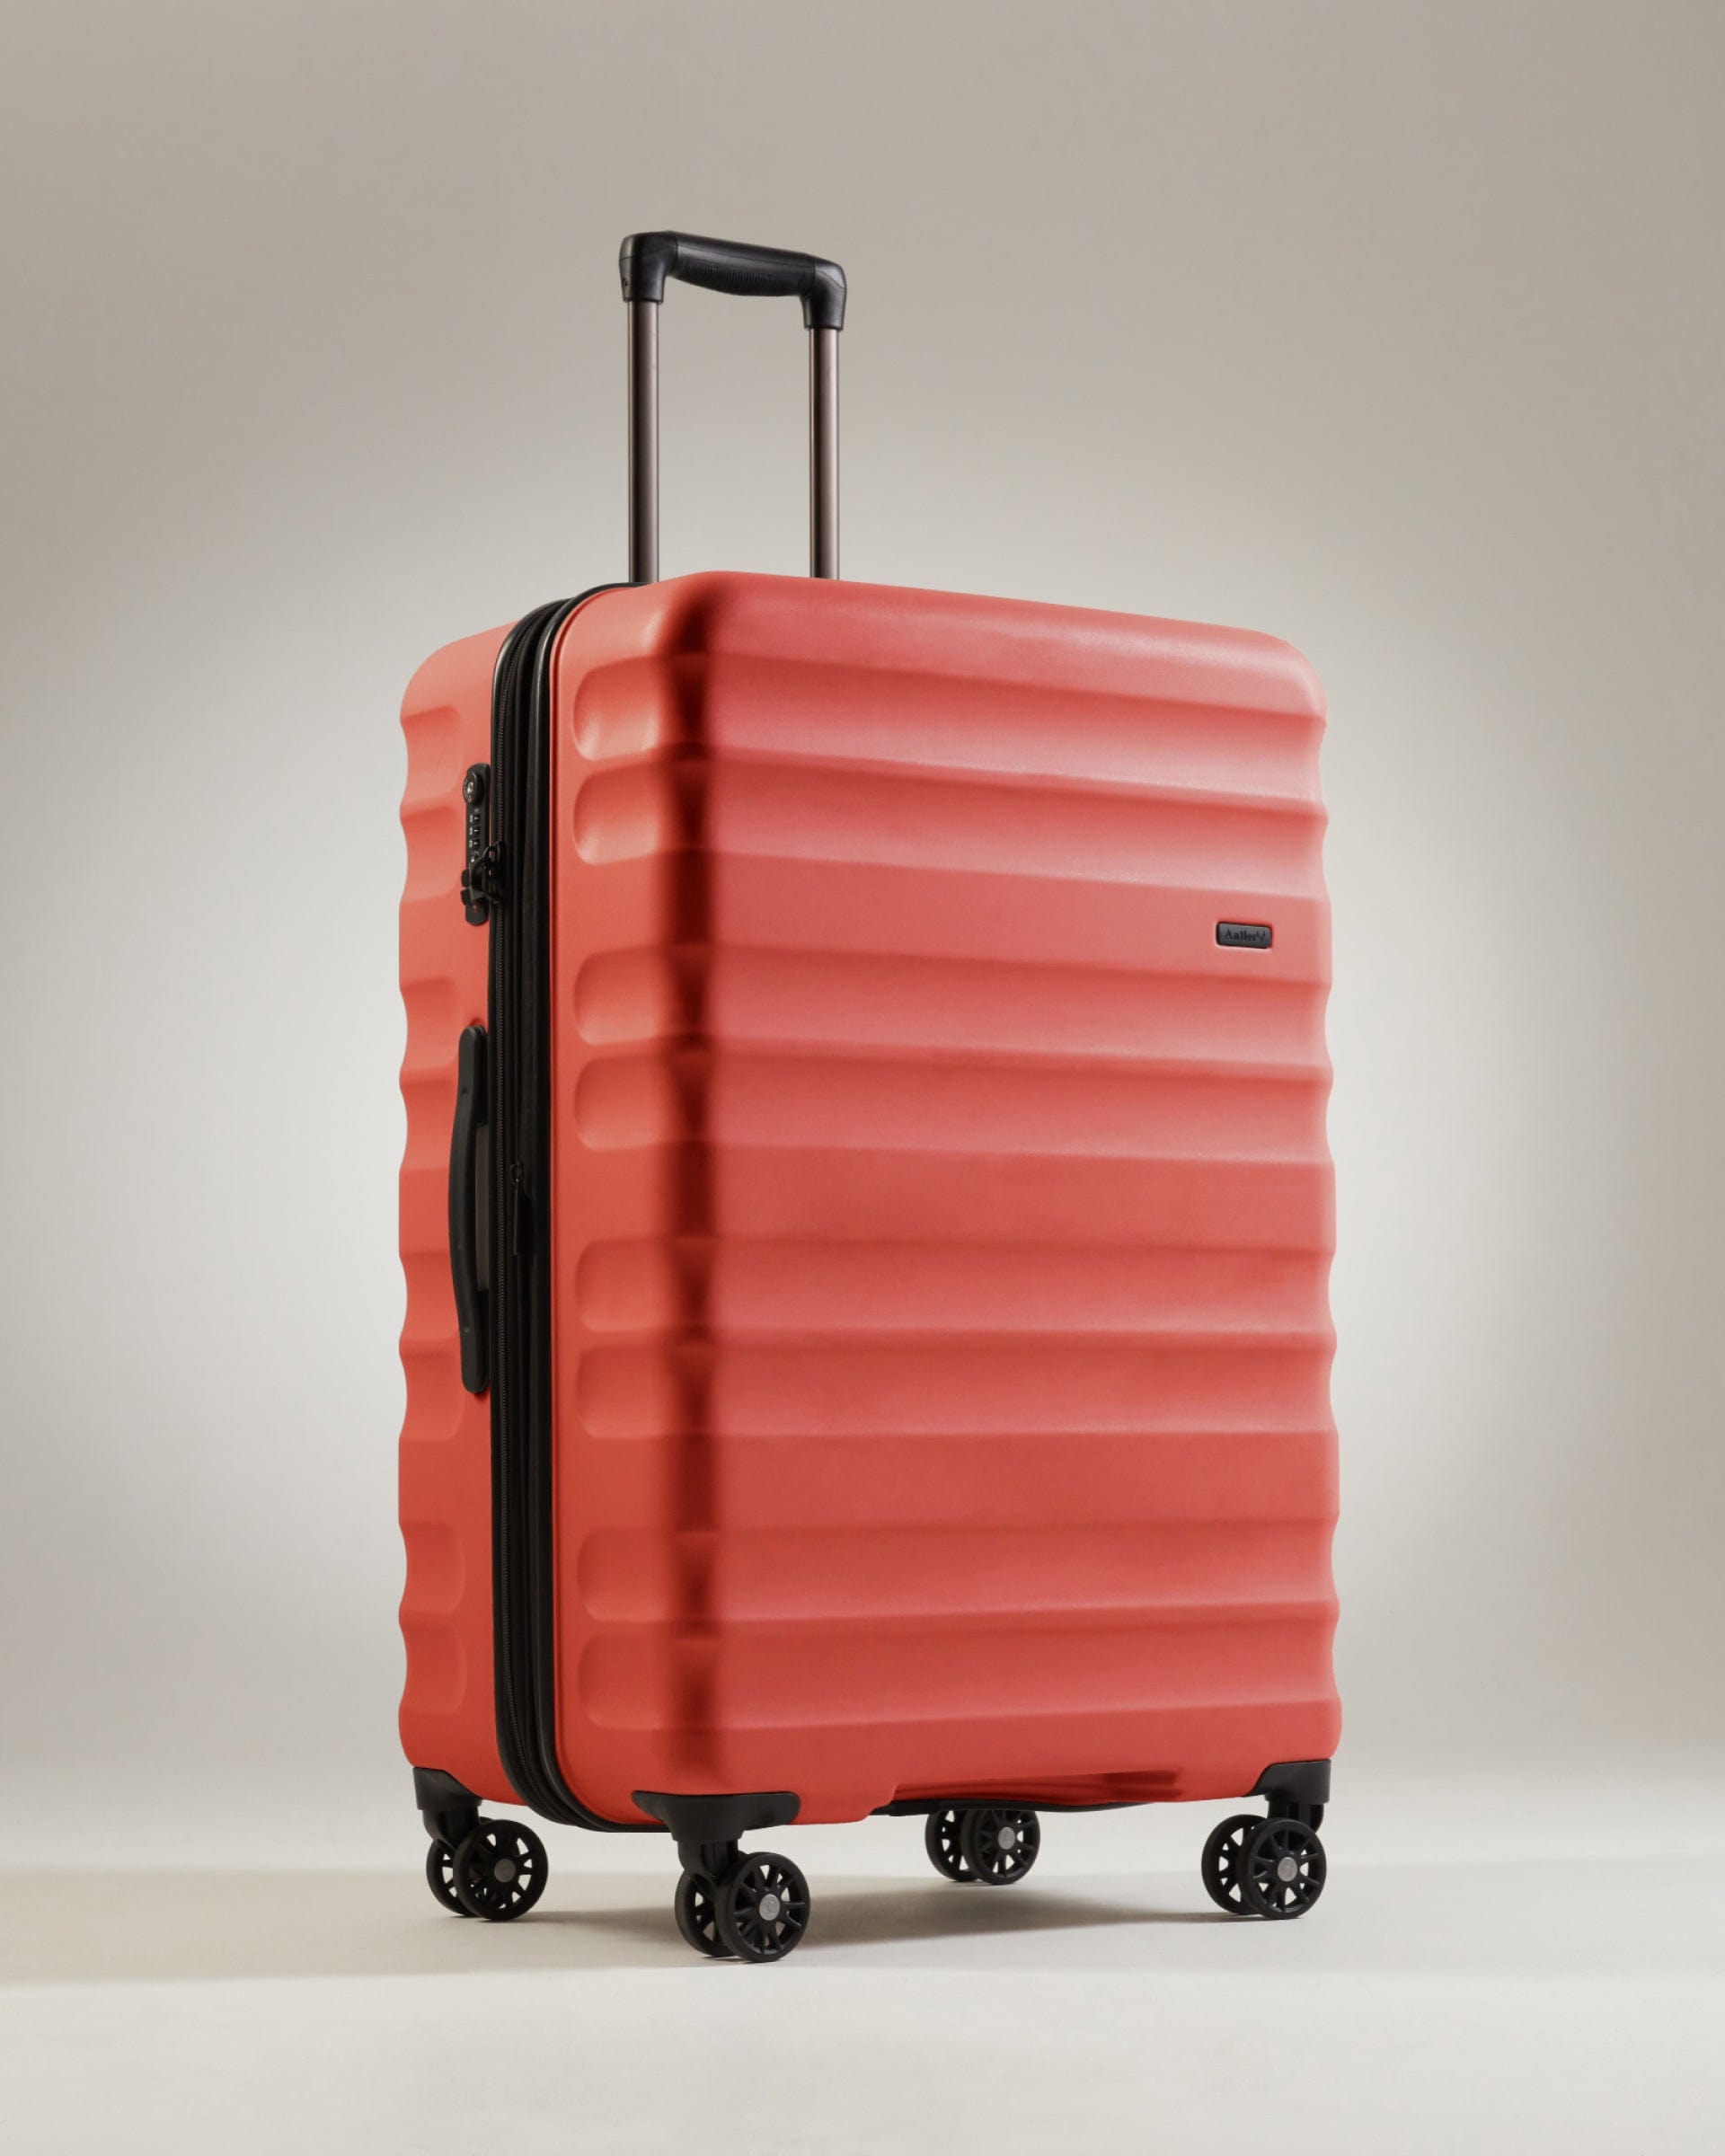 View Antler Clifton Large Suitcase In Coral Size 35 x 52 x 80 cm information